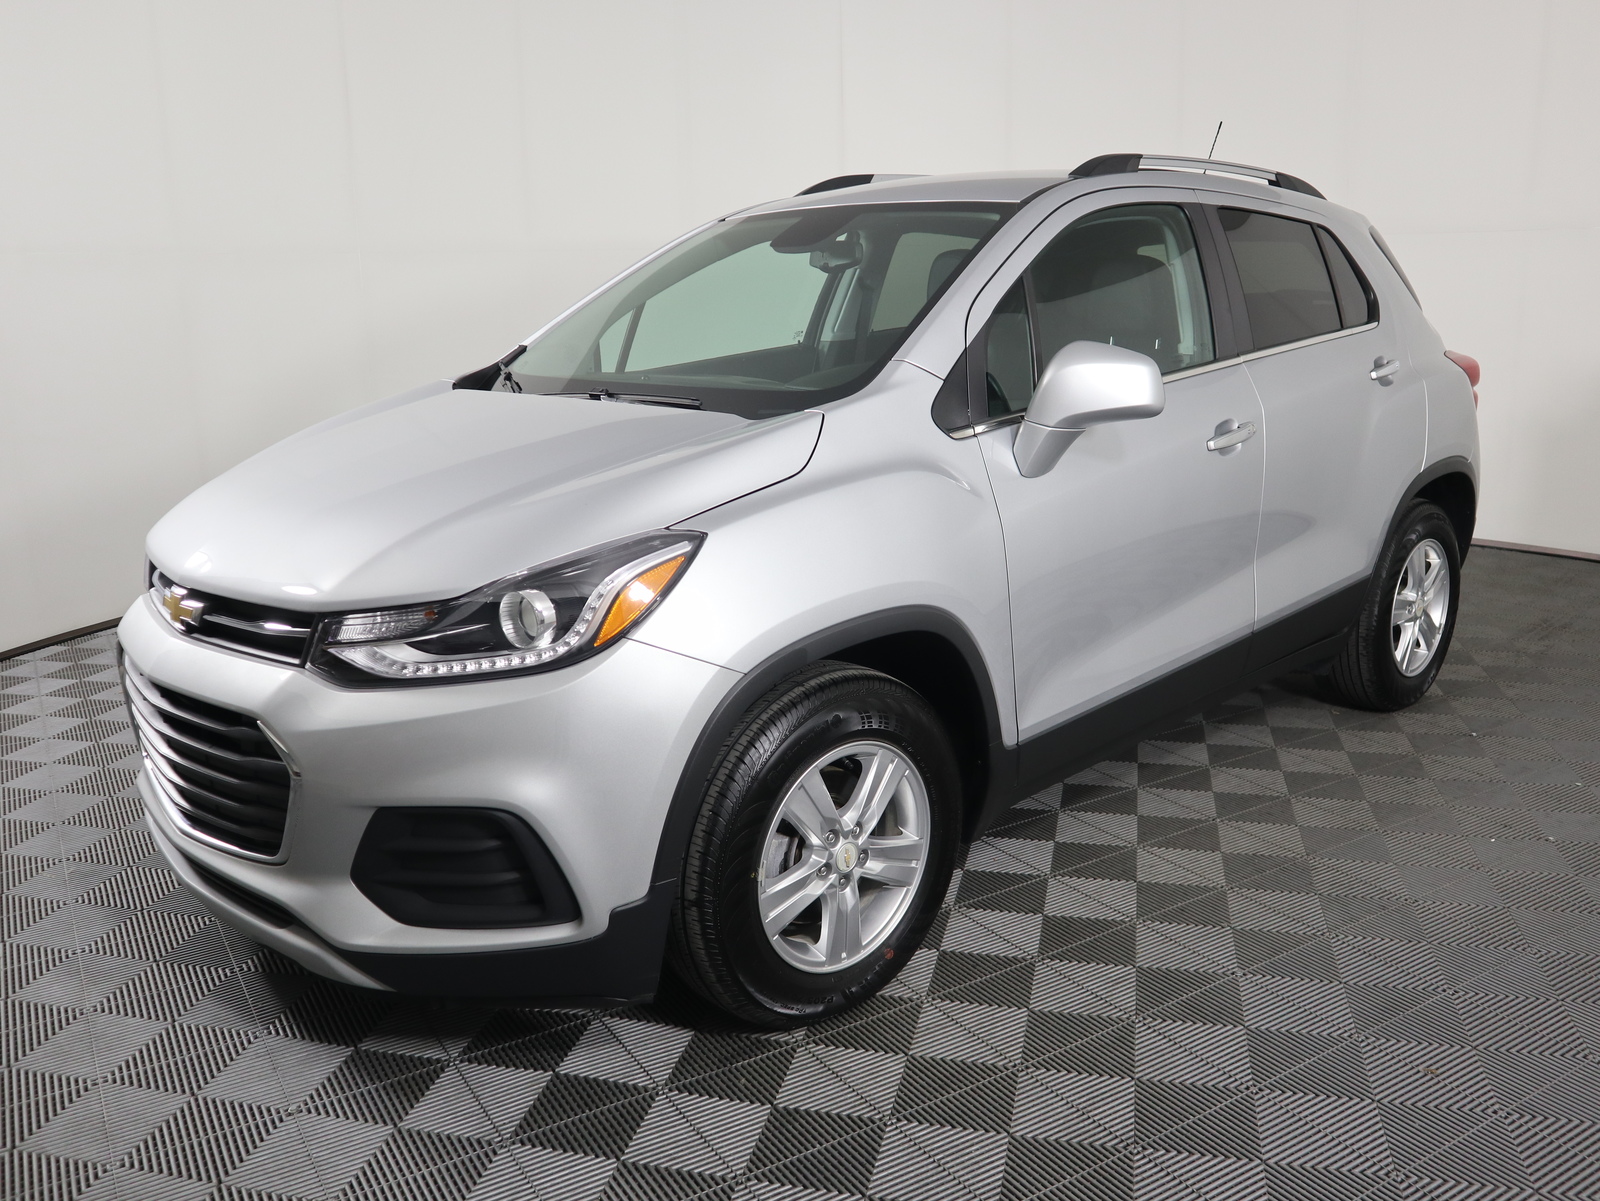 Pre-Owned 2018 Chevrolet Trax FWD 4dr LT Sport Utility in Savoy #VD8913 ...